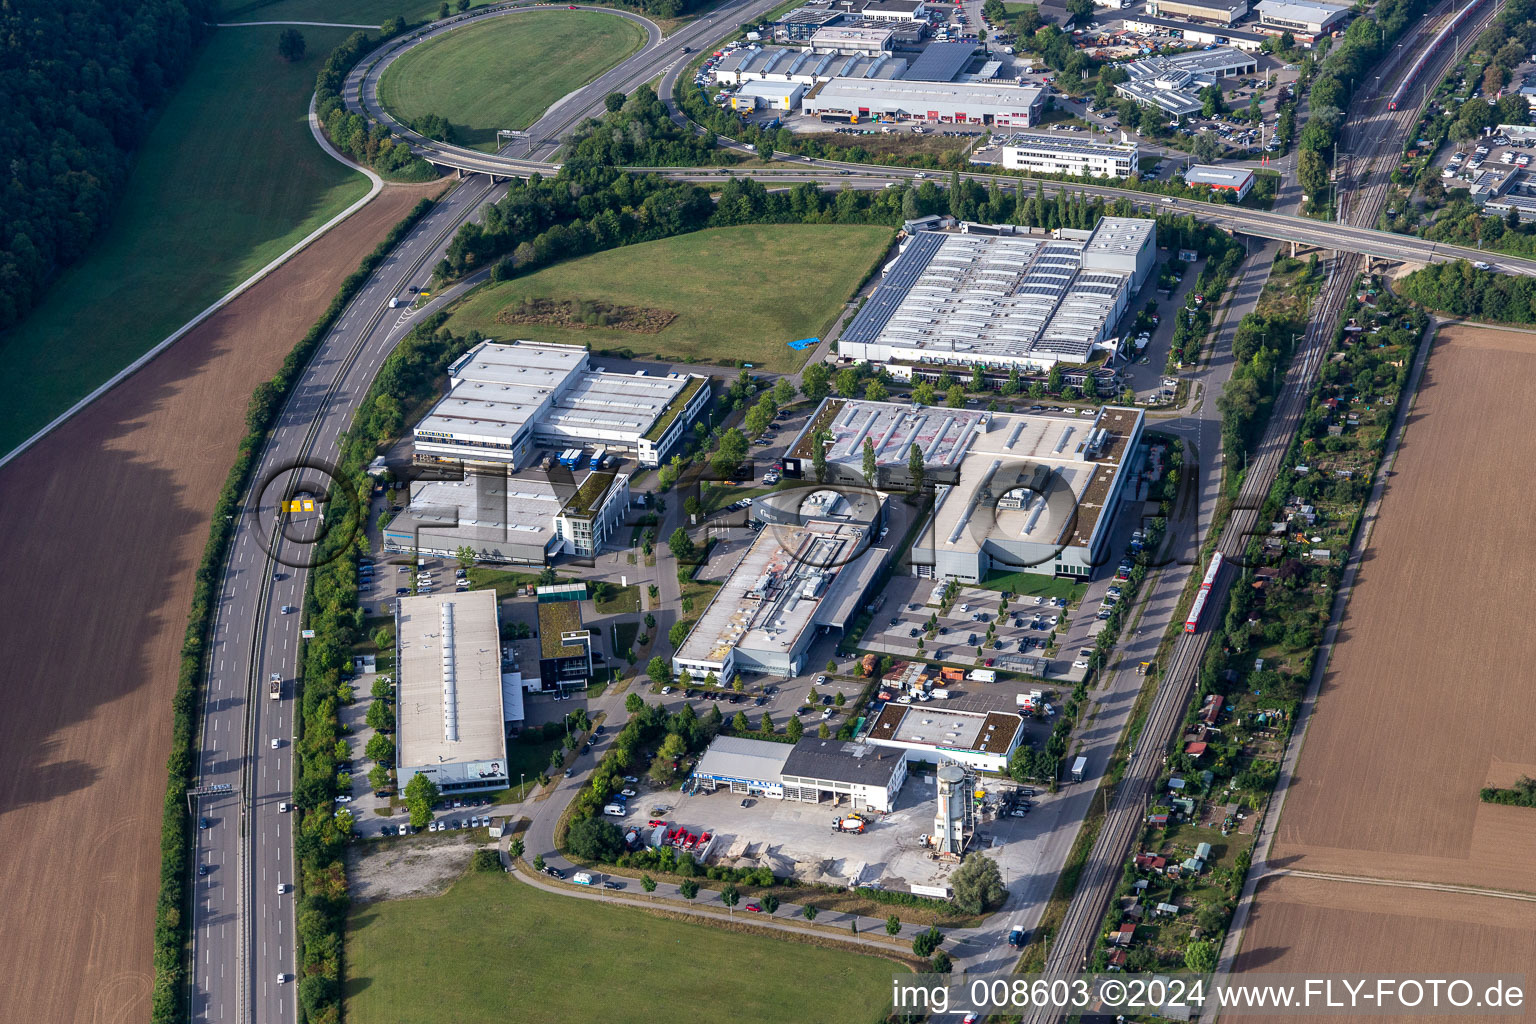 Aerial view of Industrial and commercial area with Zeltwanger Maschinenbau GmbH, EUROMASTER GmbH, BayWa r.e. Solar Energy Systems GmbH and HIMMELWERK, Hoch- and Mittelfrequenzanlagen GmbH in Tuebingen in the state Baden-Wuerttemberg, Germany